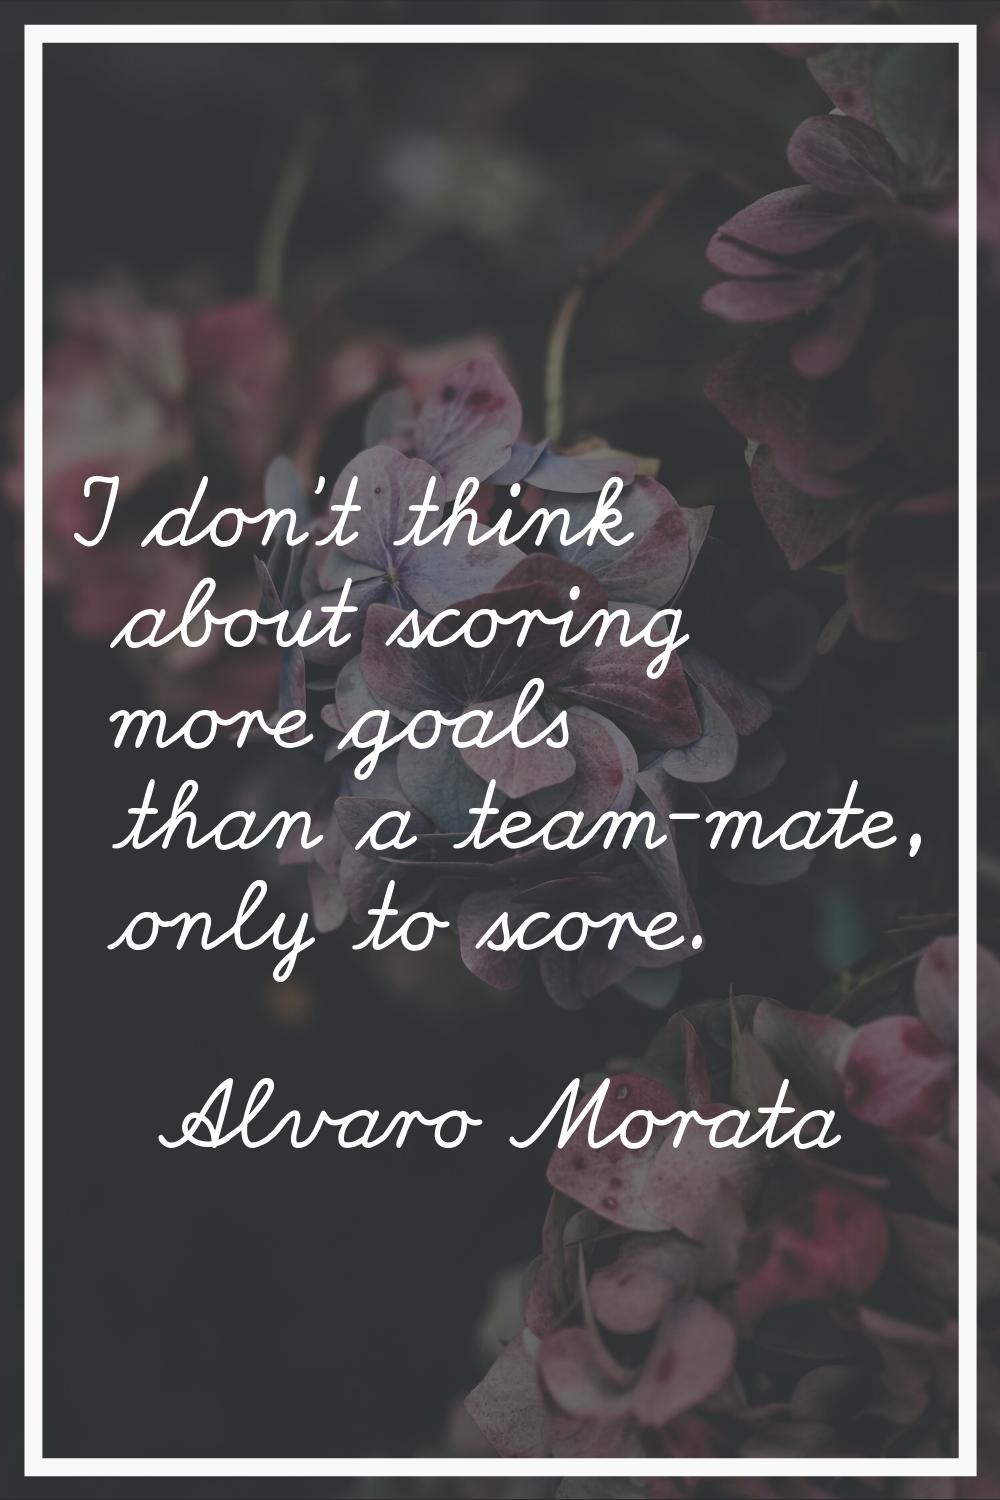 I don't think about scoring more goals than a team-mate, only to score.